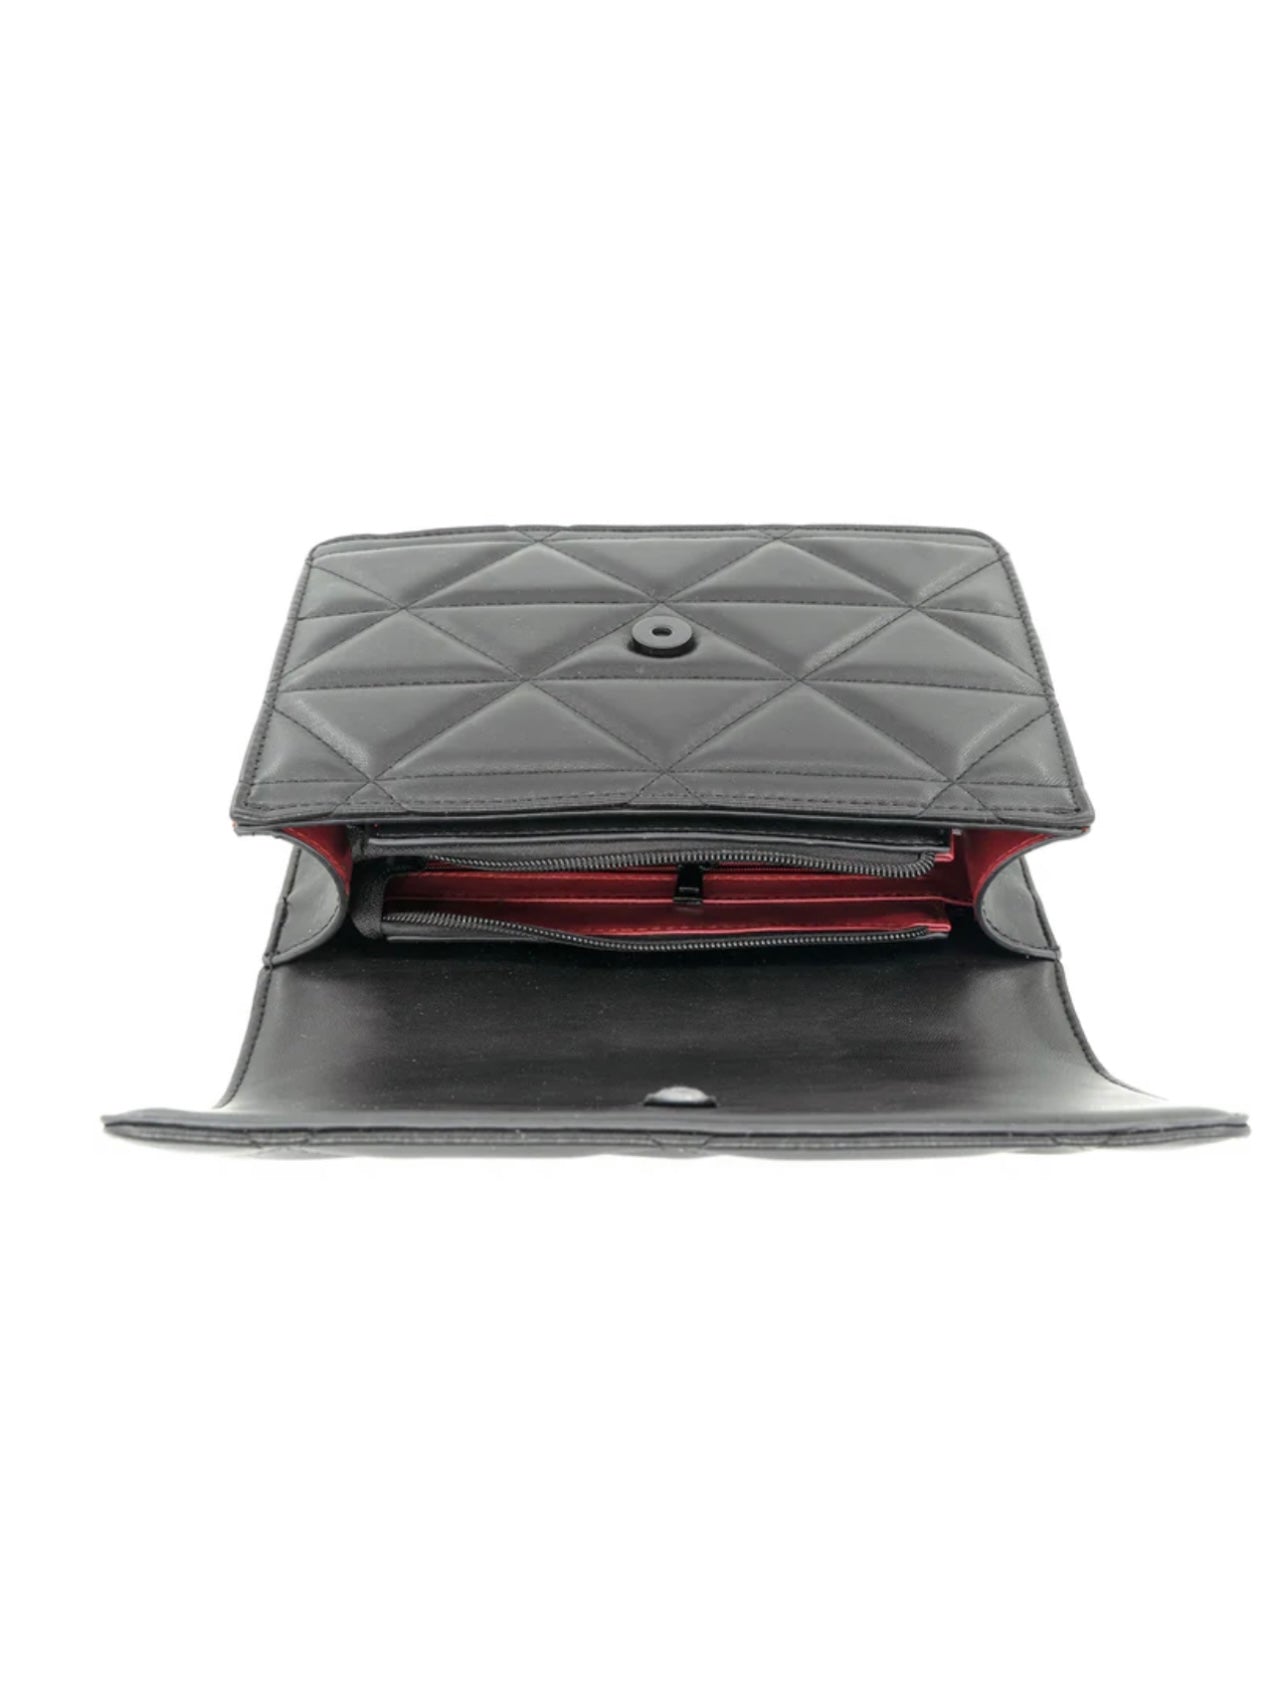 Chanel Black Lambskin Quilted Inside Graffiti Coin Purse